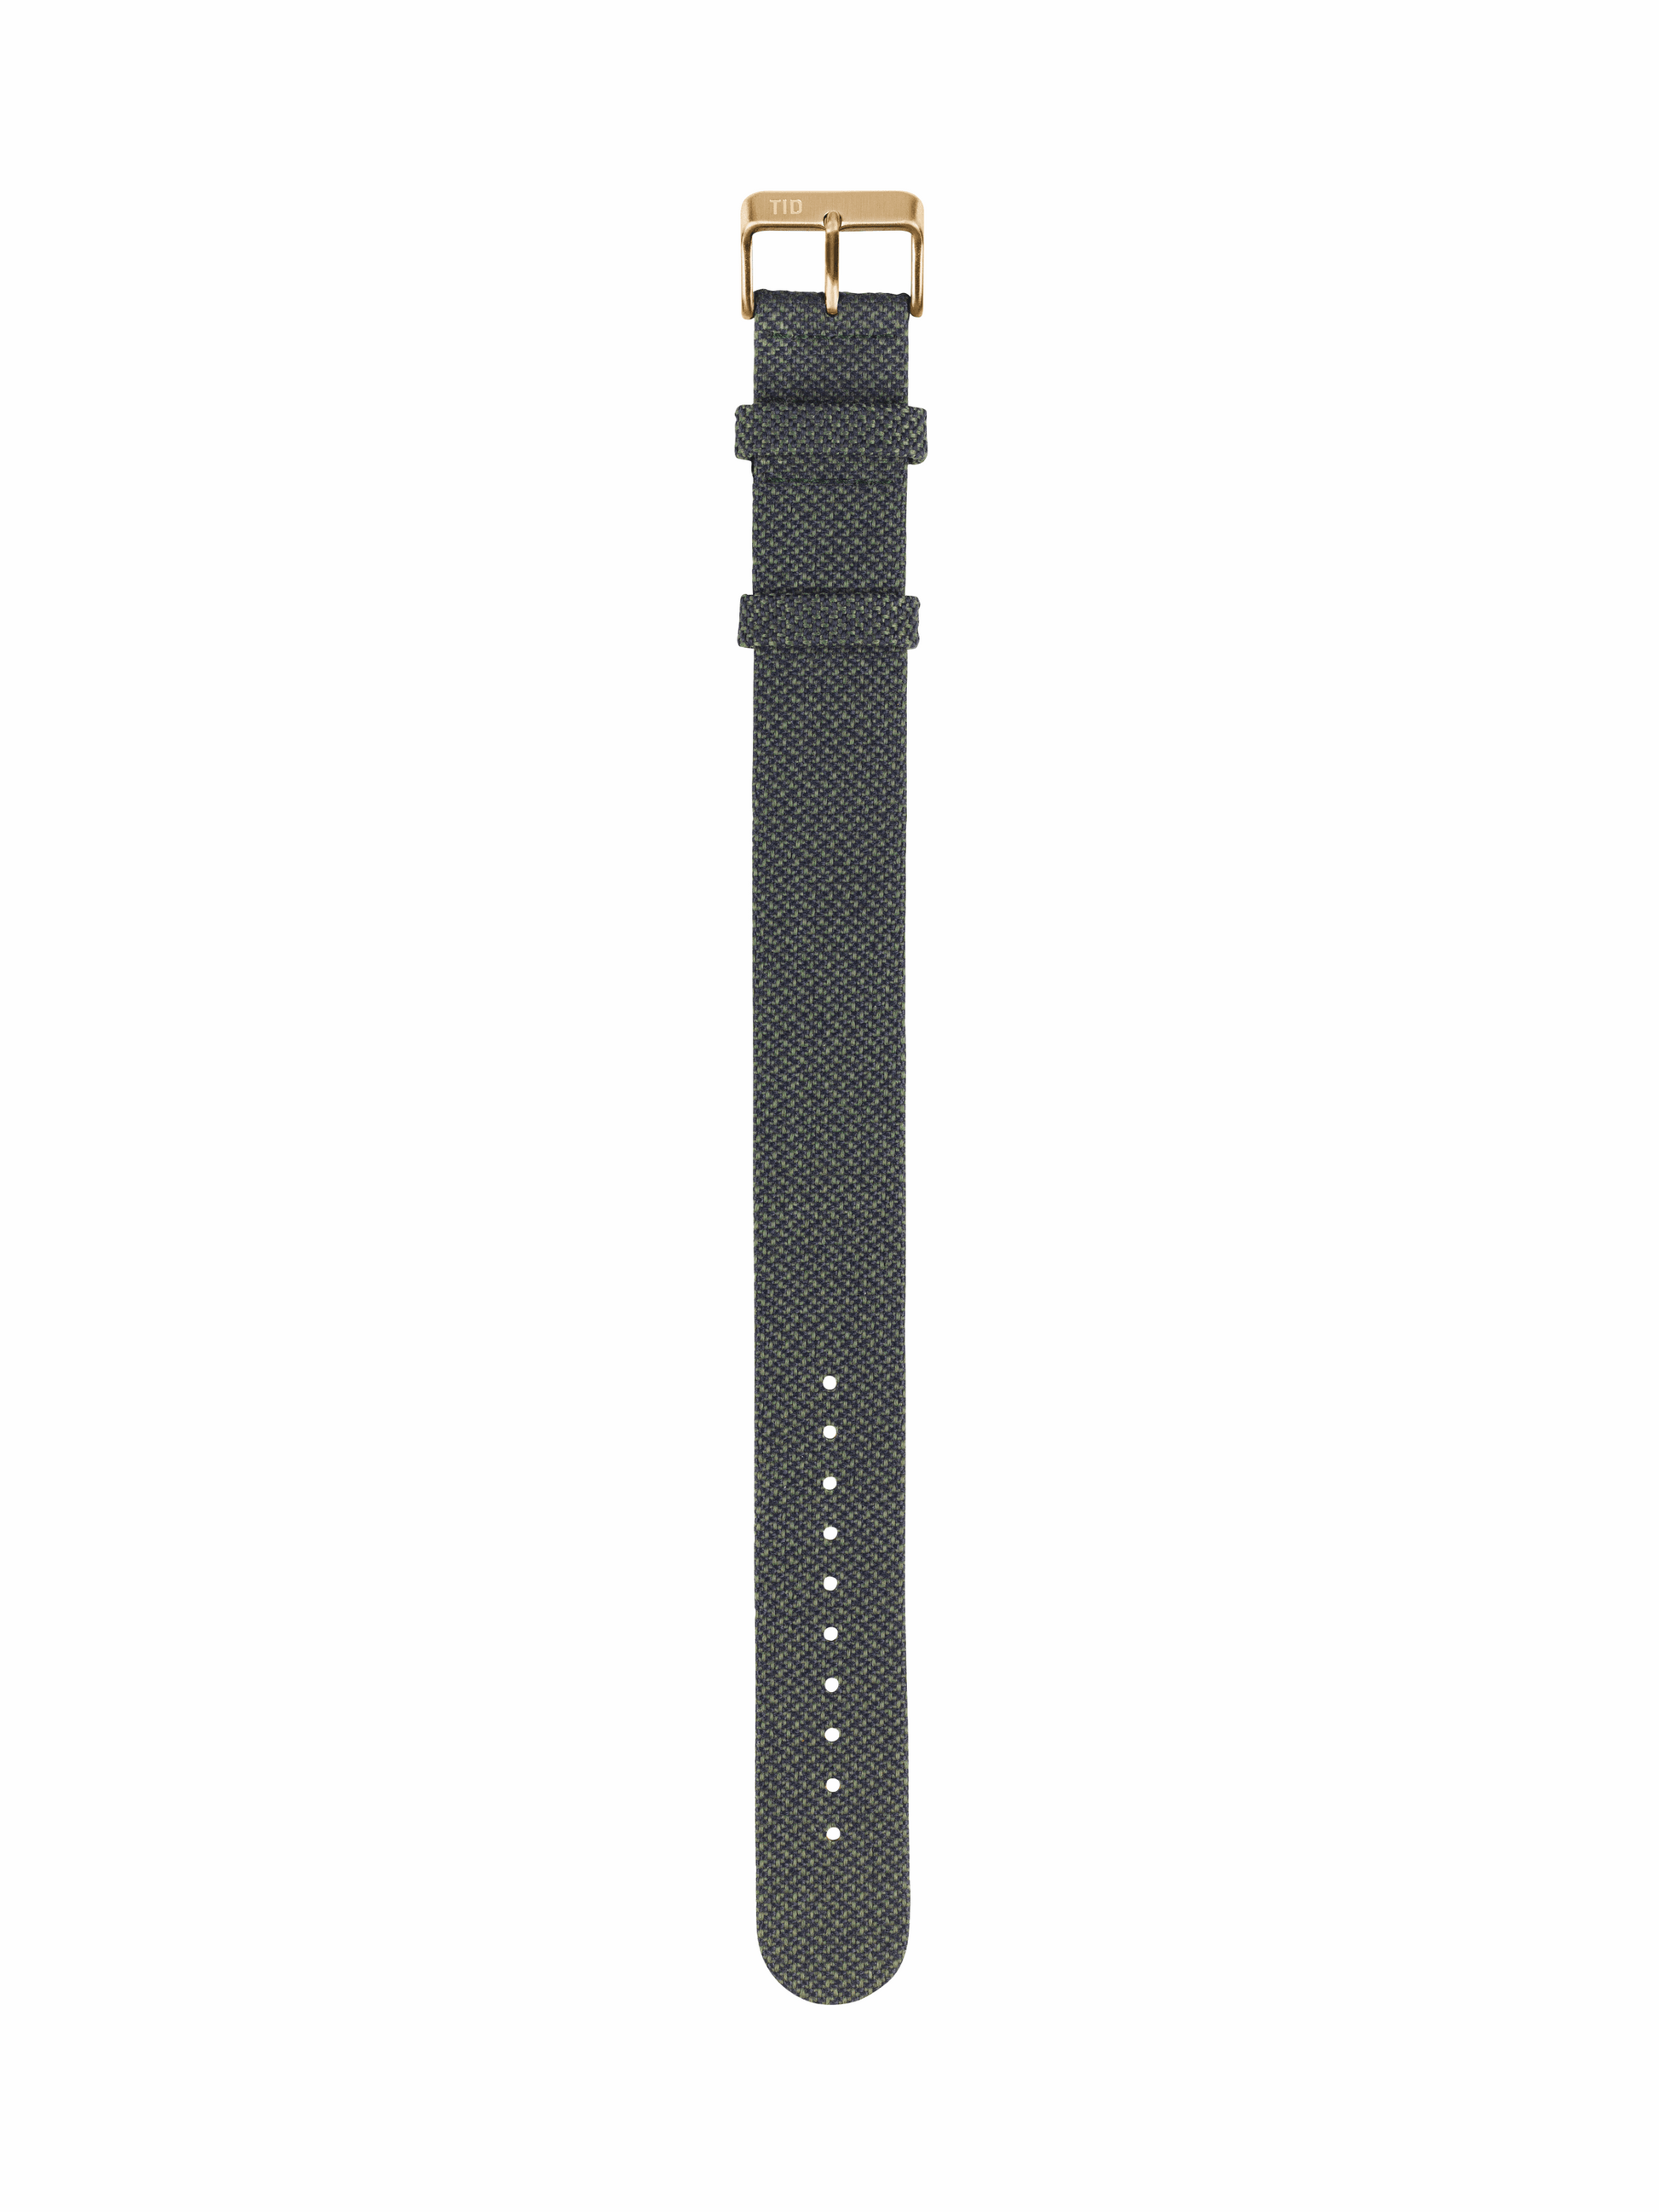 Pine Twain Strap with Black / Steel / Gold Buckle - TID WATCHES